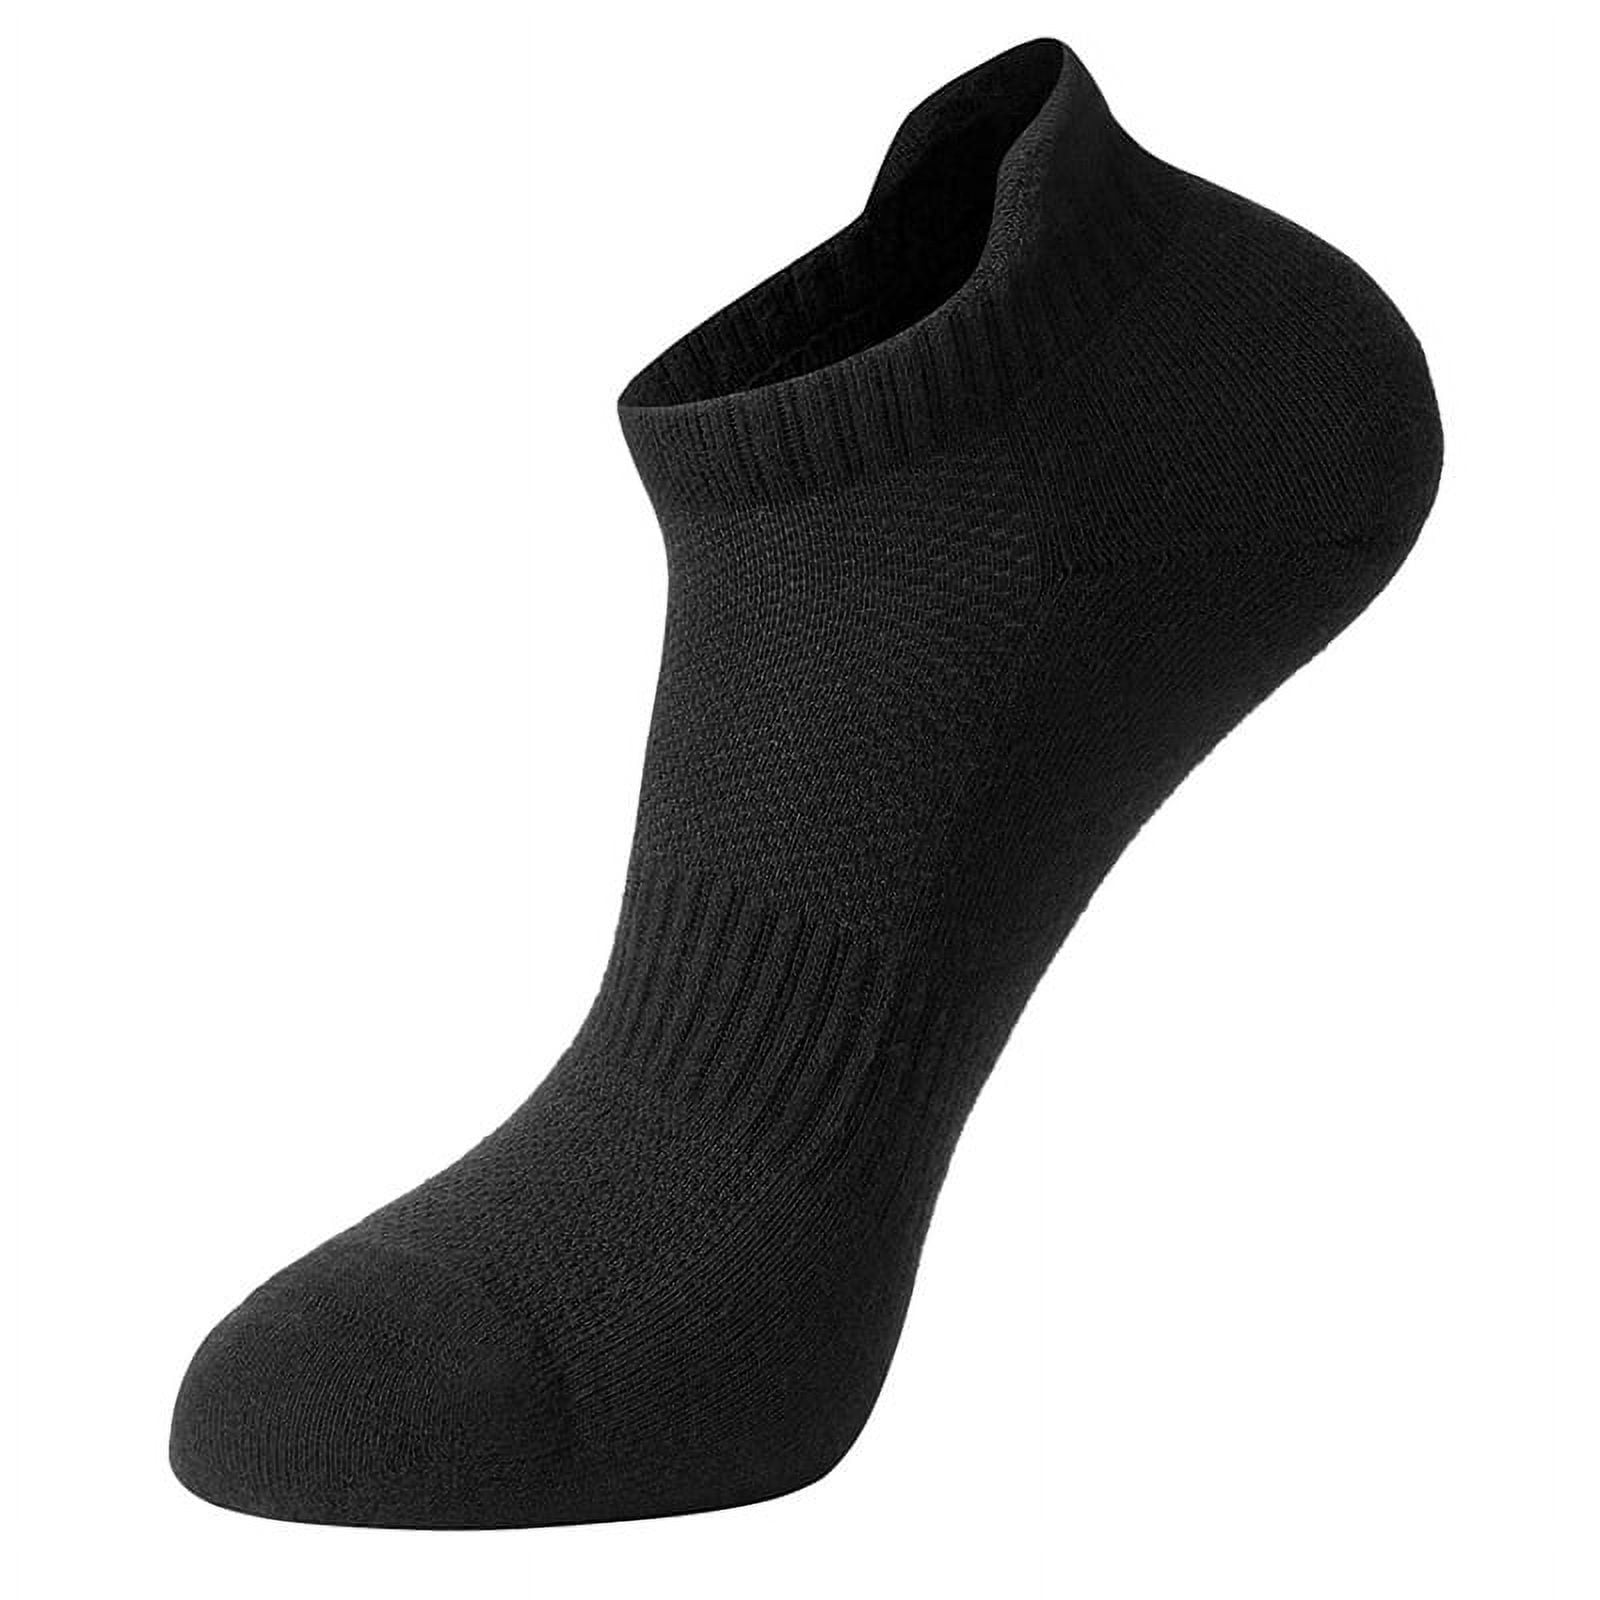 Ankle Socks Women's Thin Athletic Running Low Cut No Show Socks With ...